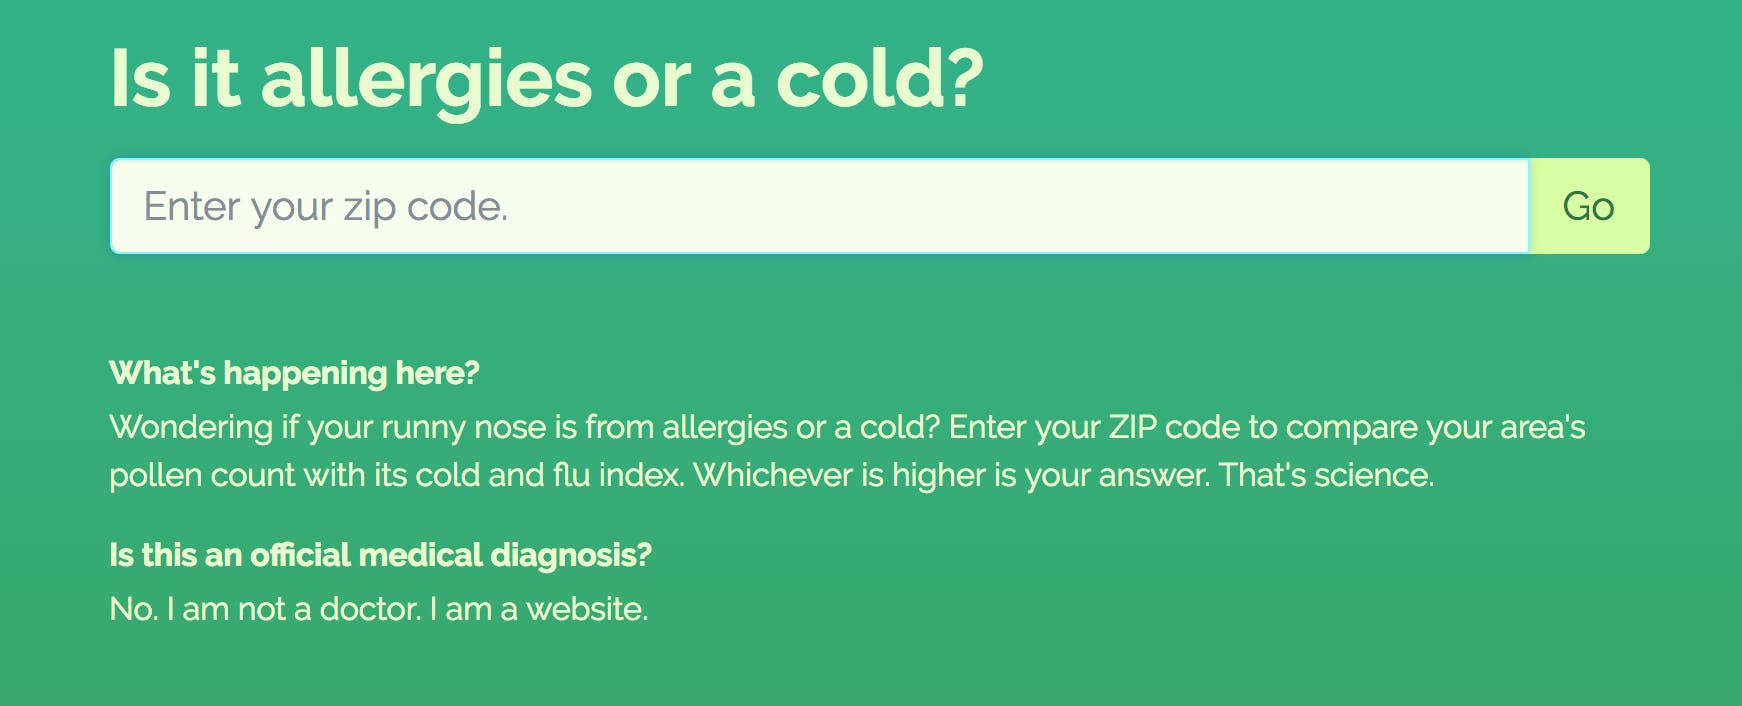 Allergies or a cold? media 2